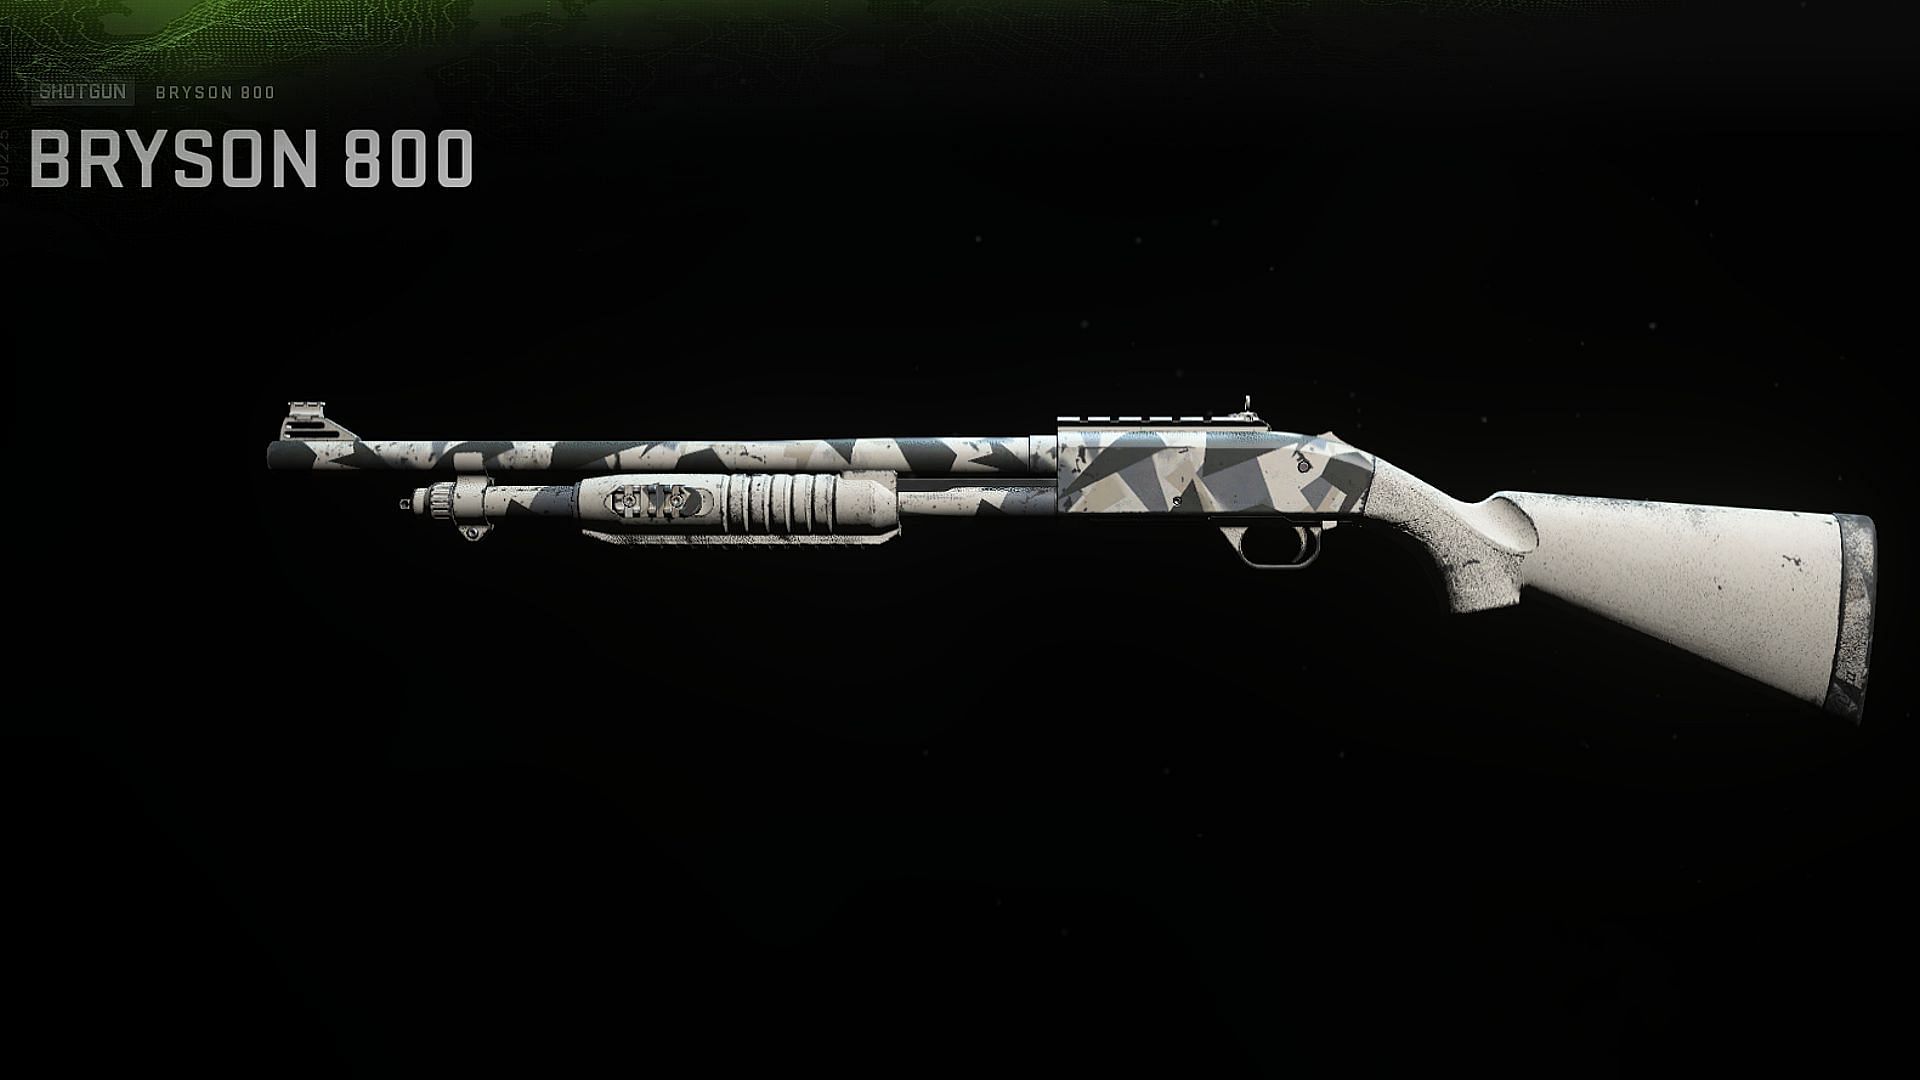 The Bryson 800 shotgun in Call of Duty Warzone 2.0 (Image via Activision)